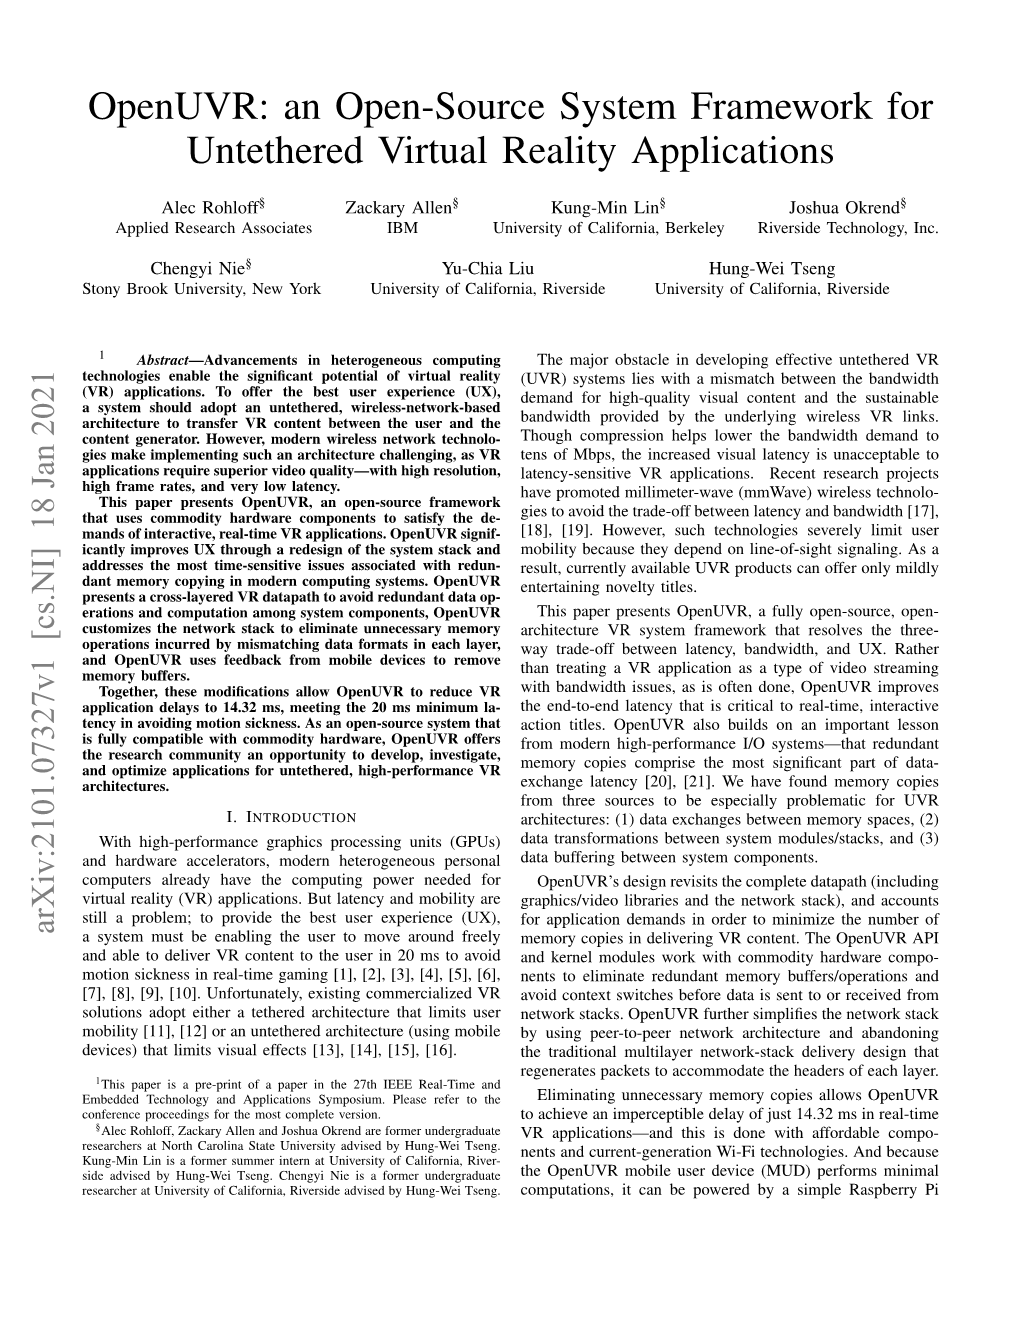 An Open-Source System Framework for Untethered Virtual Reality Applications